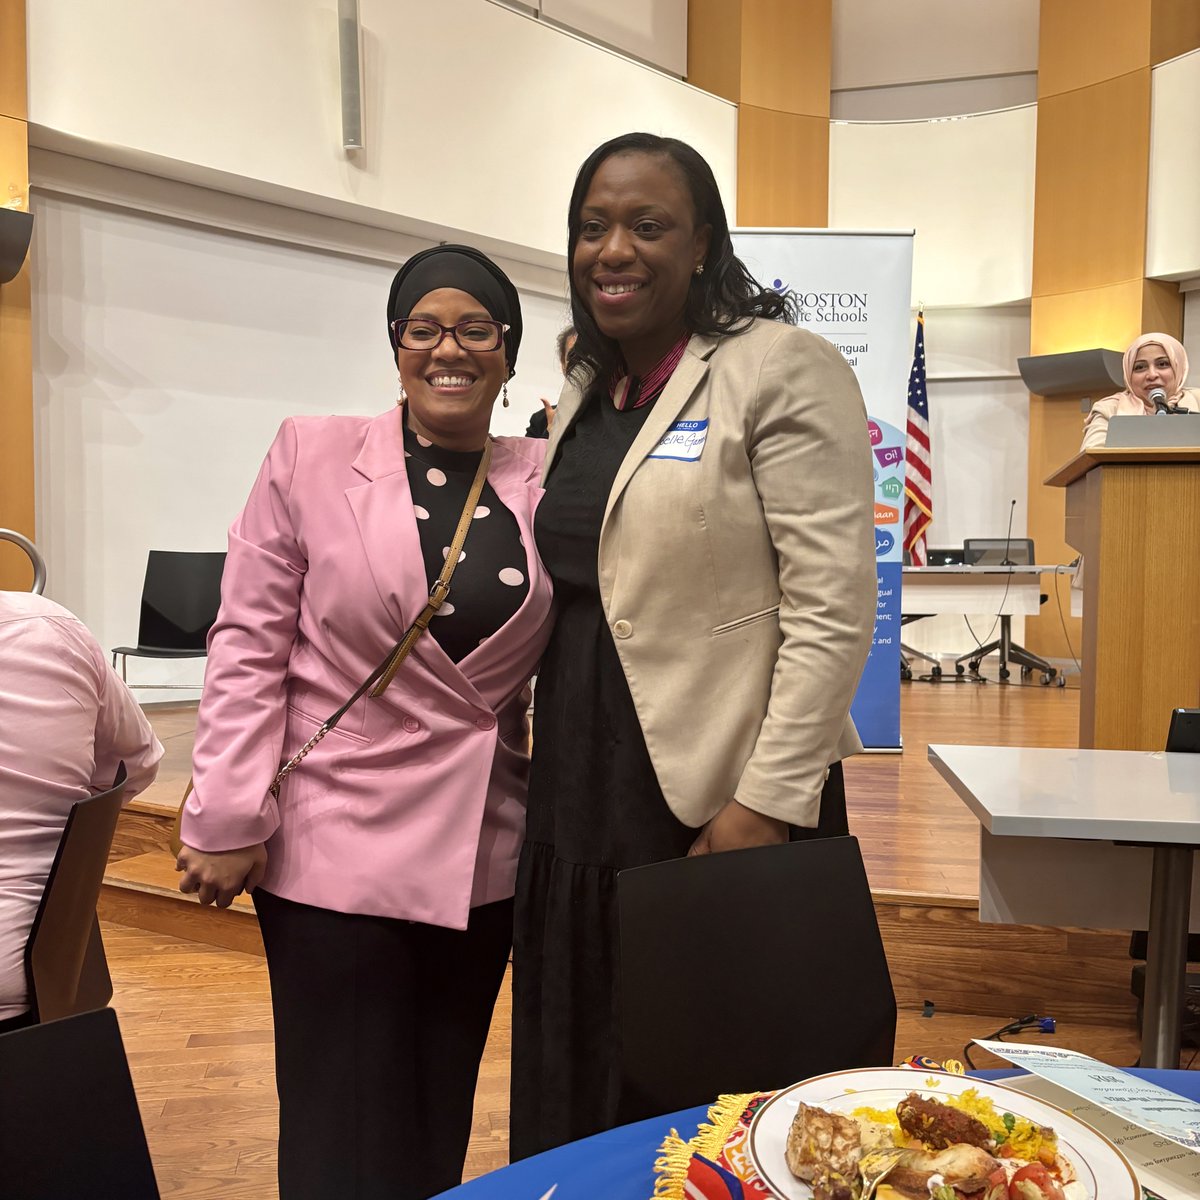 Thanks to everyone who joined us March 28 at @BostonSchools’ 6th annual Ramadan community Iftar to break their Ramadan fast together. Thanks to our guest speakers, BPS Food & Nutrition Services, the ML family team, and OMME department for organizing the event.